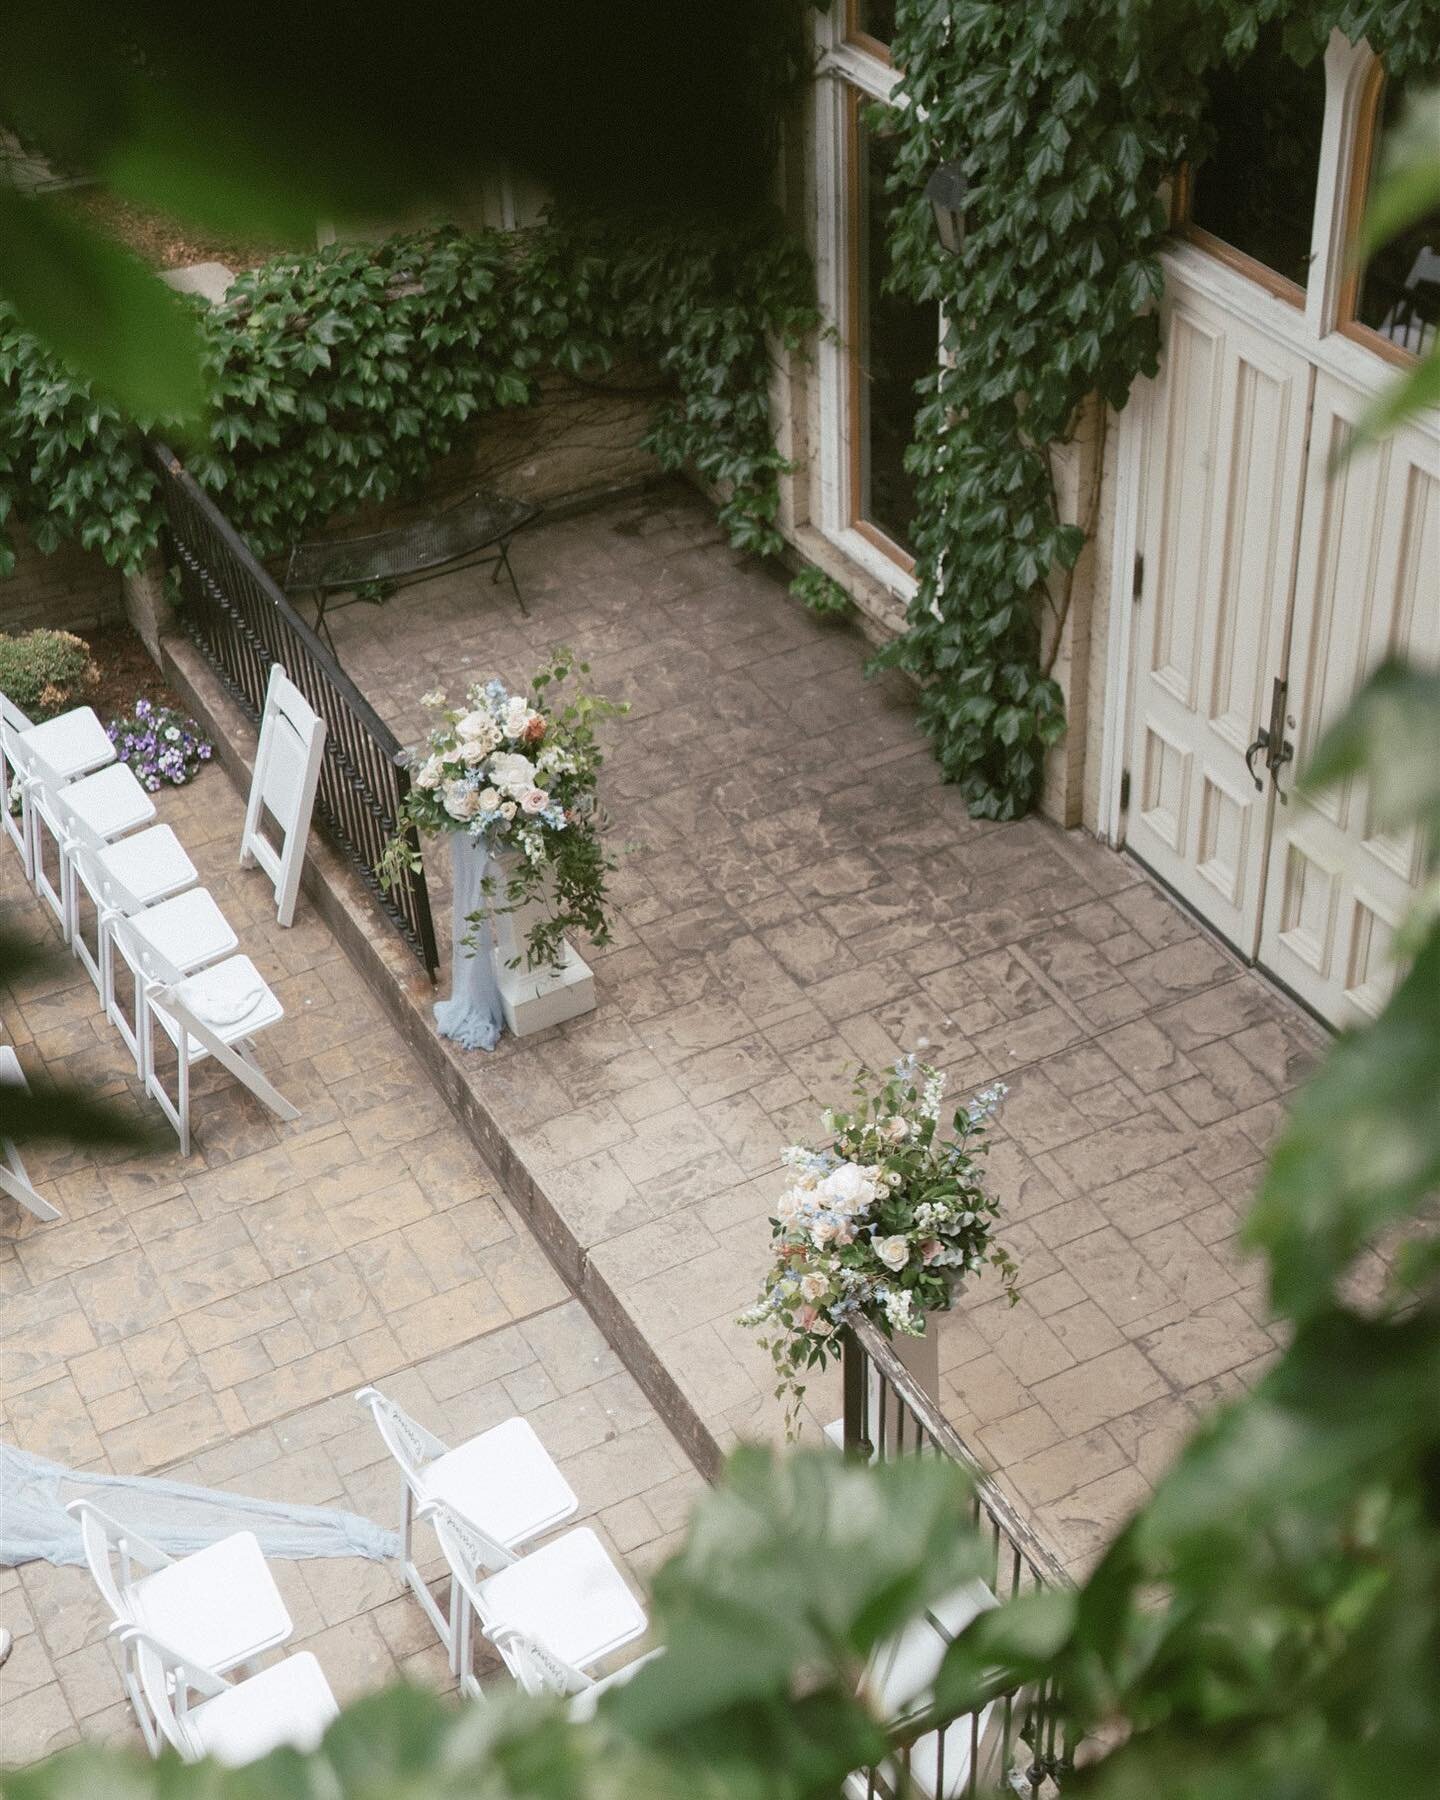 Our real wedding was featured on @premierbridemilwaukee 📰🤩

Some of our favorite highlights:
The Ceremony - &ldquo;With its lush ivy vines and double doors, it was the most picturesque place to get married.&rdquo;

&ldquo;The Fitzgerald was only th